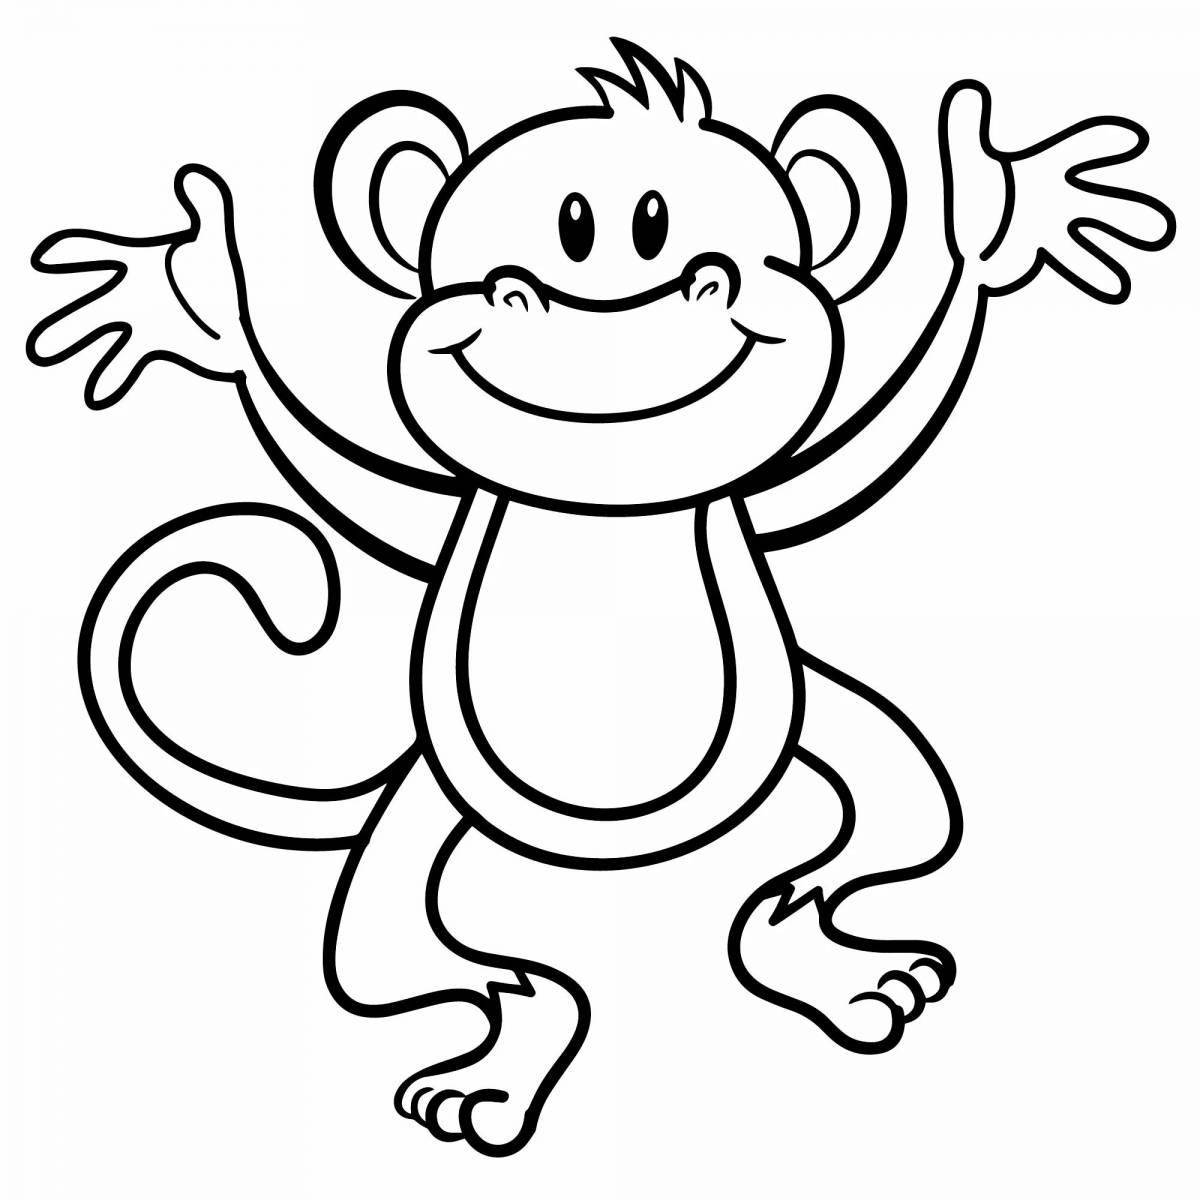 Colorful chimpanzee coloring page for kids